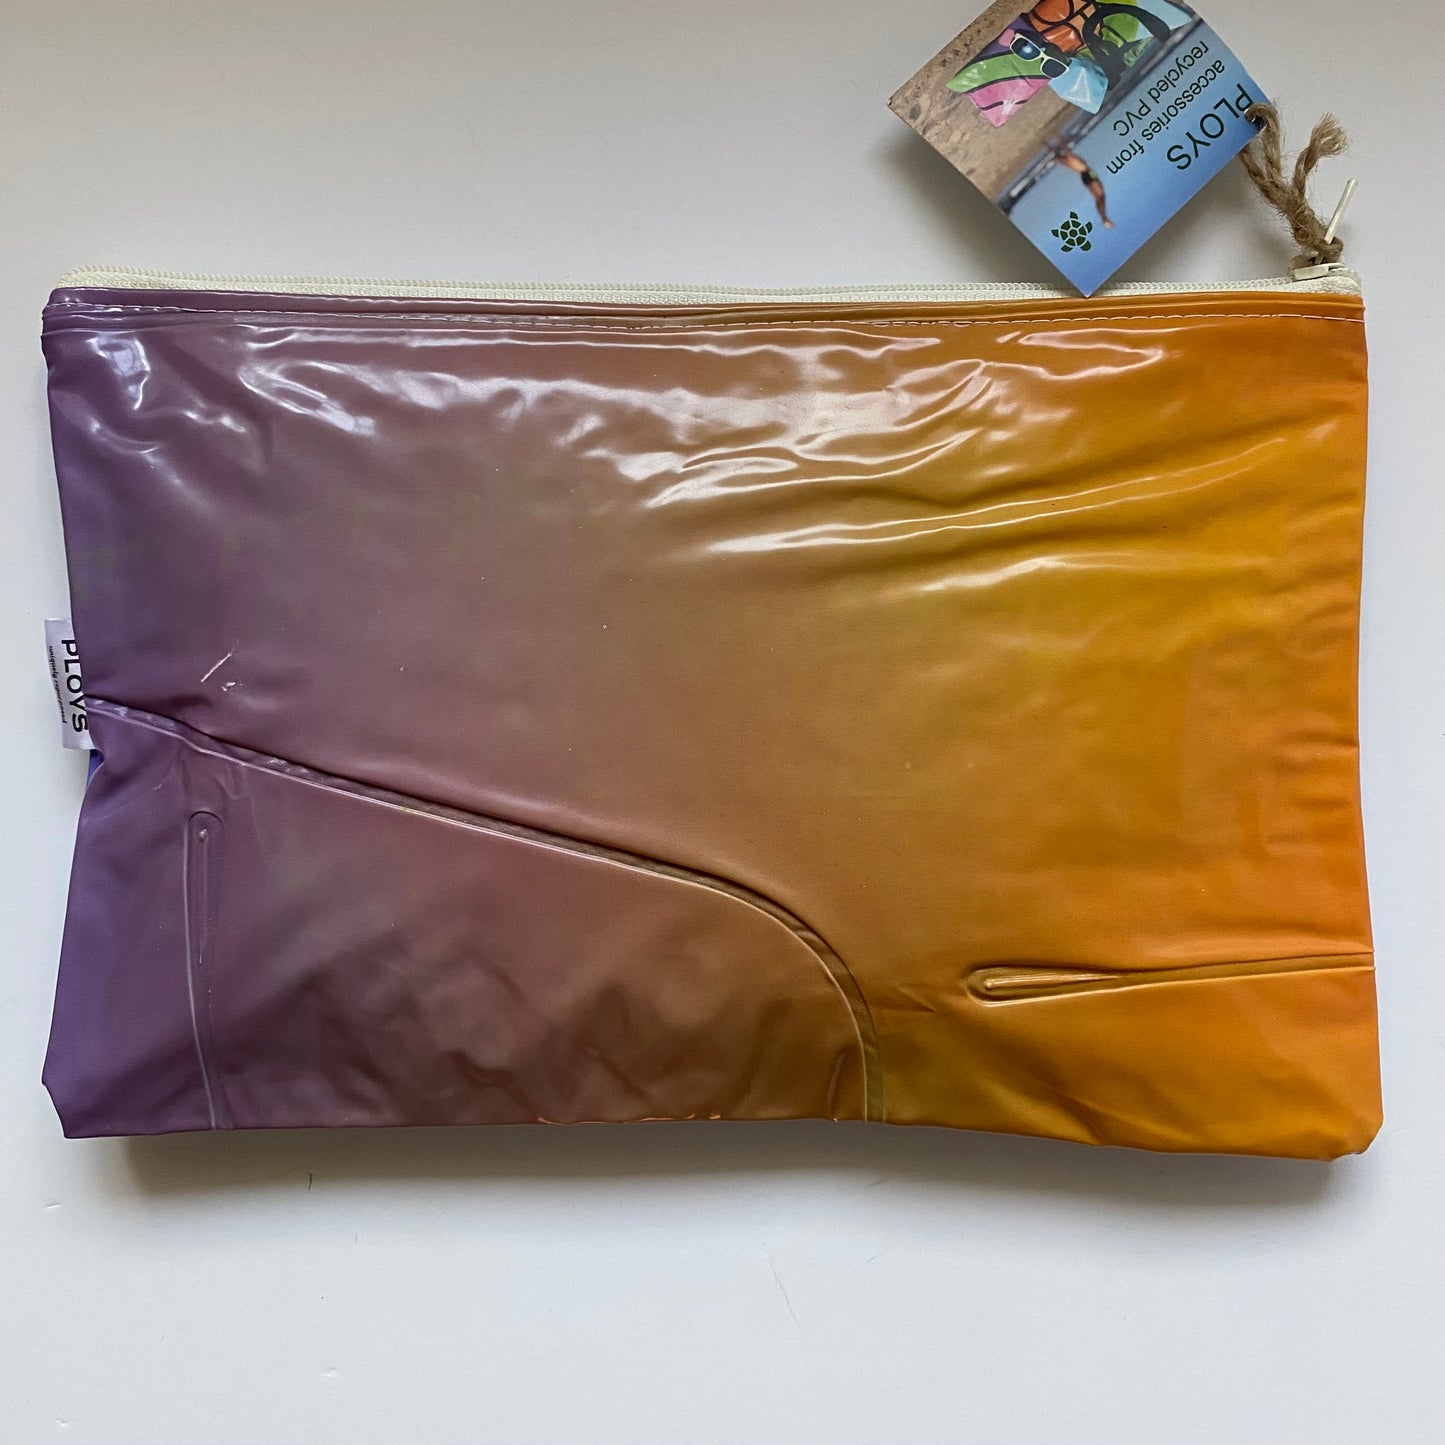 Recycled Maxi Purses, Pencilcases, Zippered Pouches or Wet bags - ex inflatables - variety of colours